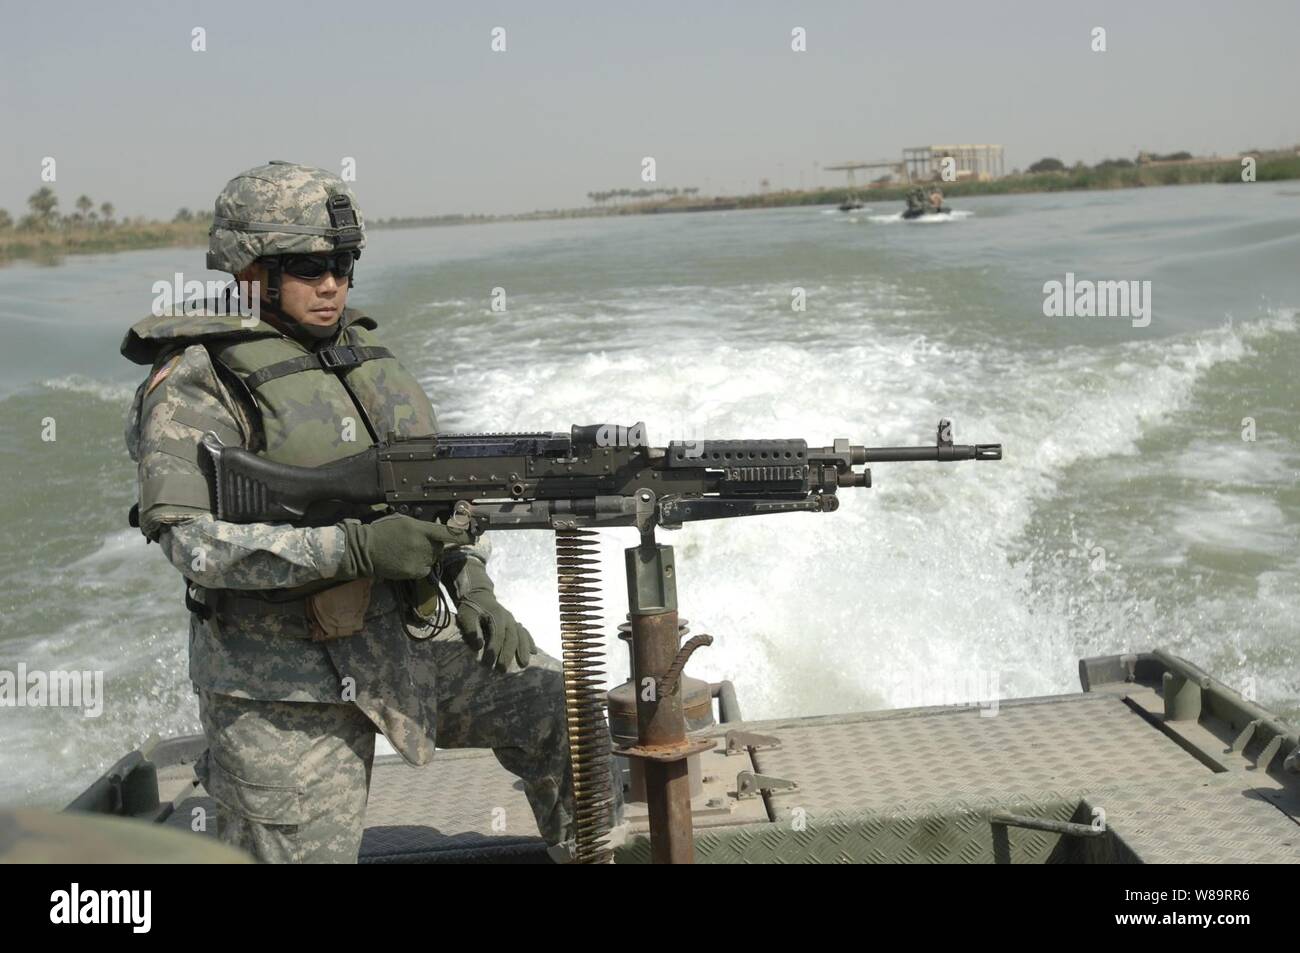 U.S. Army Master Sgt. Nardo Dedicatoria keeps an eye on the shoreline of the Euphrates River during a reconnaissance mission near Musayyib, Iraq, on March 21, 2006.  Coalition soldiers are not only patrolling the streets of Iraq, but the waterways as well.  Dedicatoria is attached to Echo Company, 1st Battalion, 67th Armored Regiment. Stock Photo